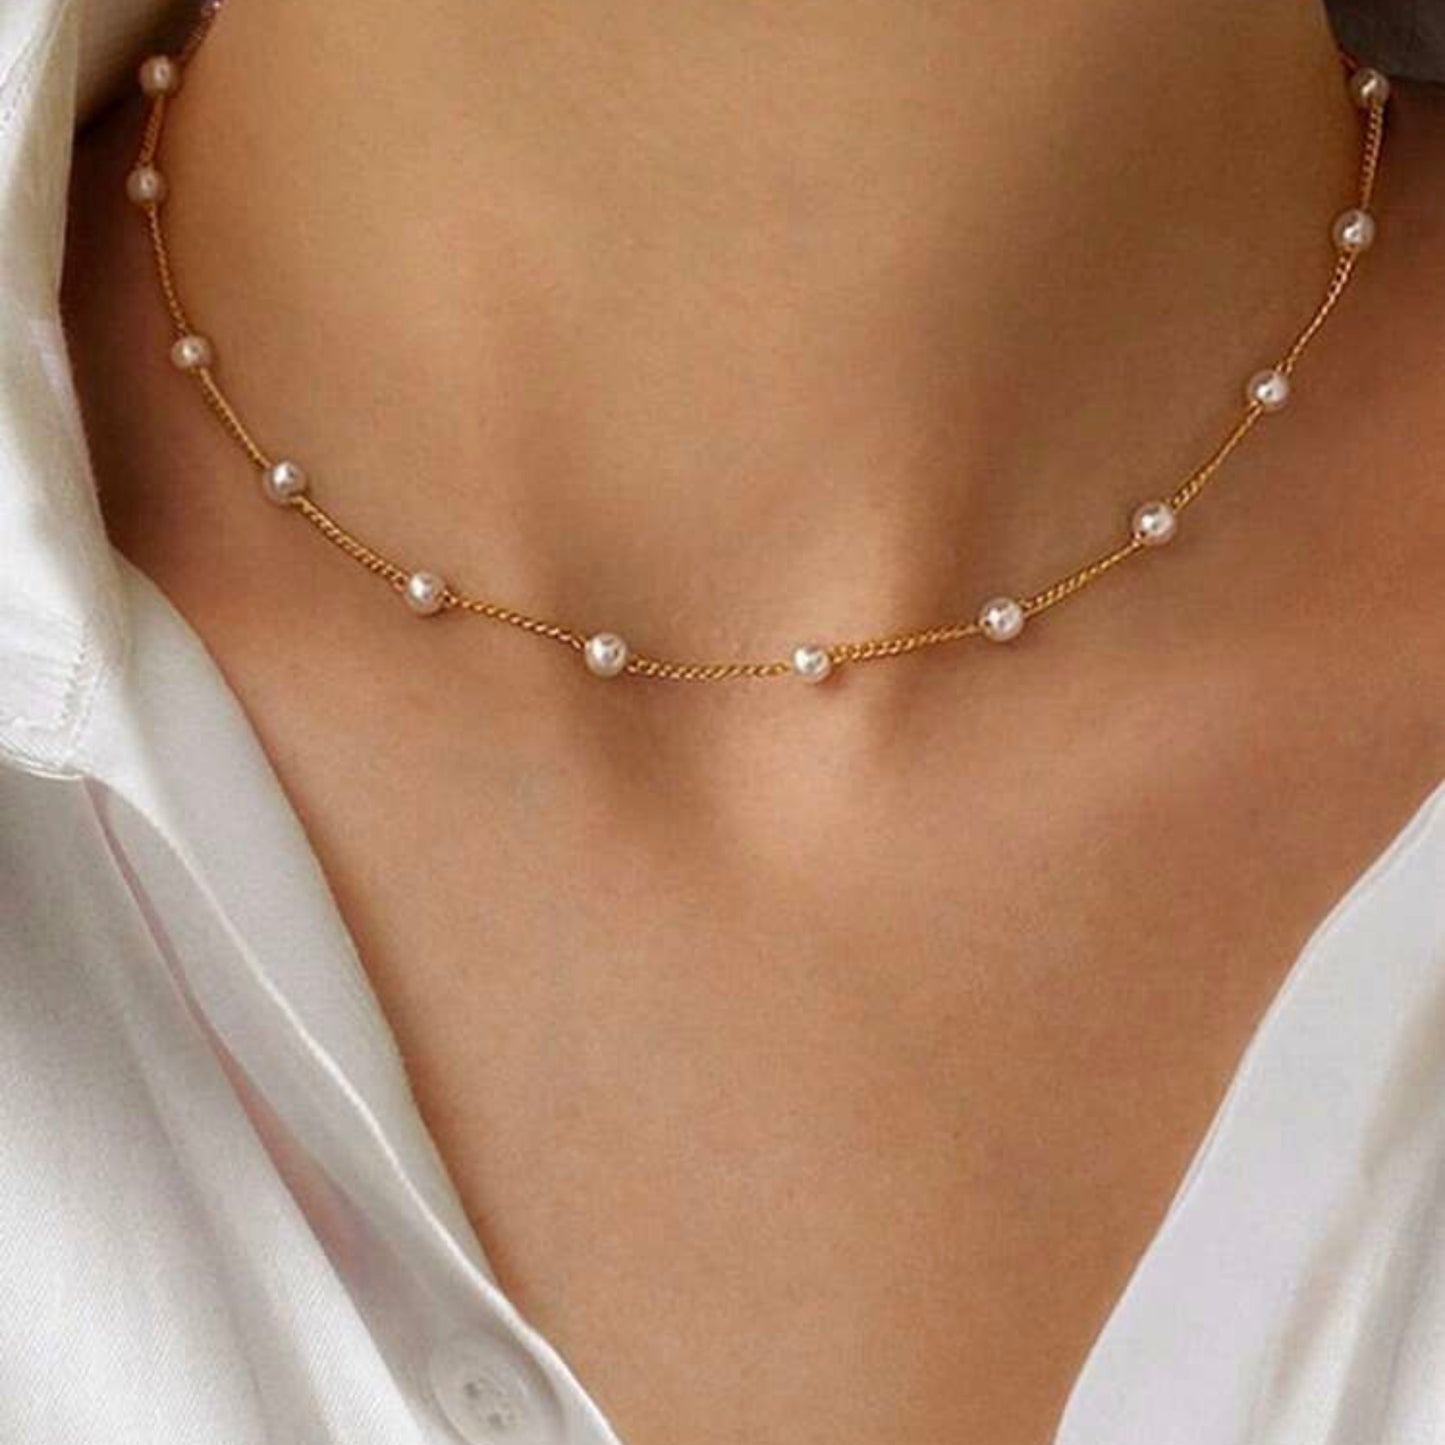 pearls necklace